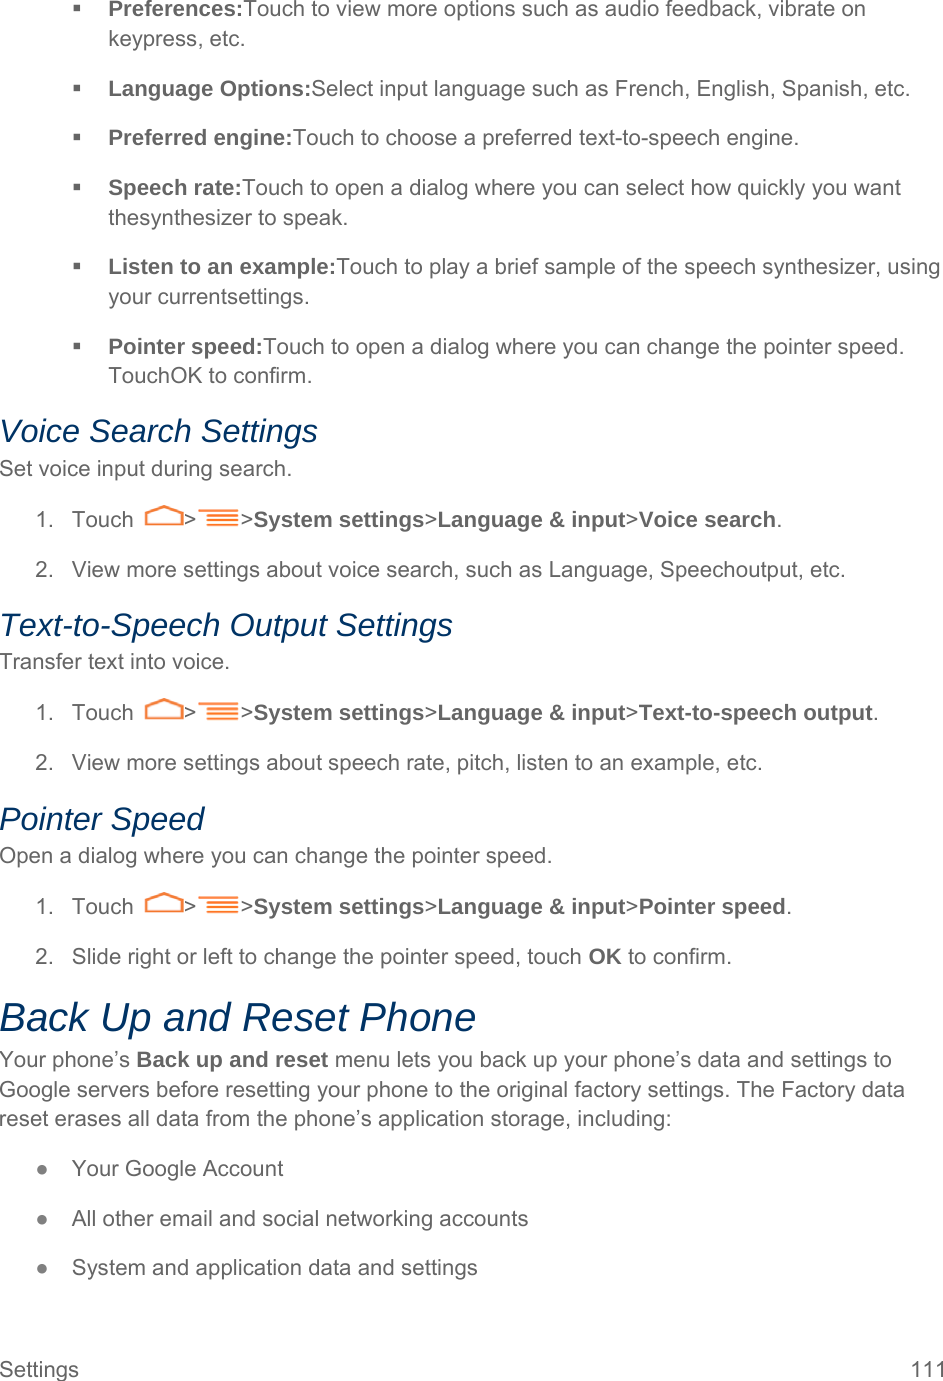 Settings  111  Preferences:Touch to view more options such as audio feedback, vibrate on keypress, etc.  Language Options:Select input language such as French, English, Spanish, etc.  Preferred engine:Touch to choose a preferred text-to-speech engine.  Speech rate:Touch to open a dialog where you can select how quickly you want thesynthesizer to speak.  Listen to an example:Touch to play a brief sample of the speech synthesizer, using your currentsettings.  Pointer speed:Touch to open a dialog where you can change the pointer speed. TouchOK to confirm. Voice Search Settings Set voice input during search. 1. Touch  &gt; &gt;System settings&gt;Language &amp; input&gt;Voice search. 2.  View more settings about voice search, such as Language, Speechoutput, etc. Text-to-Speech Output Settings Transfer text into voice. 1. Touch  &gt; &gt;System settings&gt;Language &amp; input&gt;Text-to-speech output. 2.  View more settings about speech rate, pitch, listen to an example, etc. Pointer Speed Open a dialog where you can change the pointer speed. 1. Touch  &gt; &gt;System settings&gt;Language &amp; input&gt;Pointer speed. 2.  Slide right or left to change the pointer speed, touch OK to confirm. Back Up and Reset Phone Your phone’s Back up and reset menu lets you back up your phone’s data and settings to Google servers before resetting your phone to the original factory settings. The Factory data reset erases all data from the phone’s application storage, including: ● Your Google Account ● All other email and social networking accounts ● System and application data and settings 